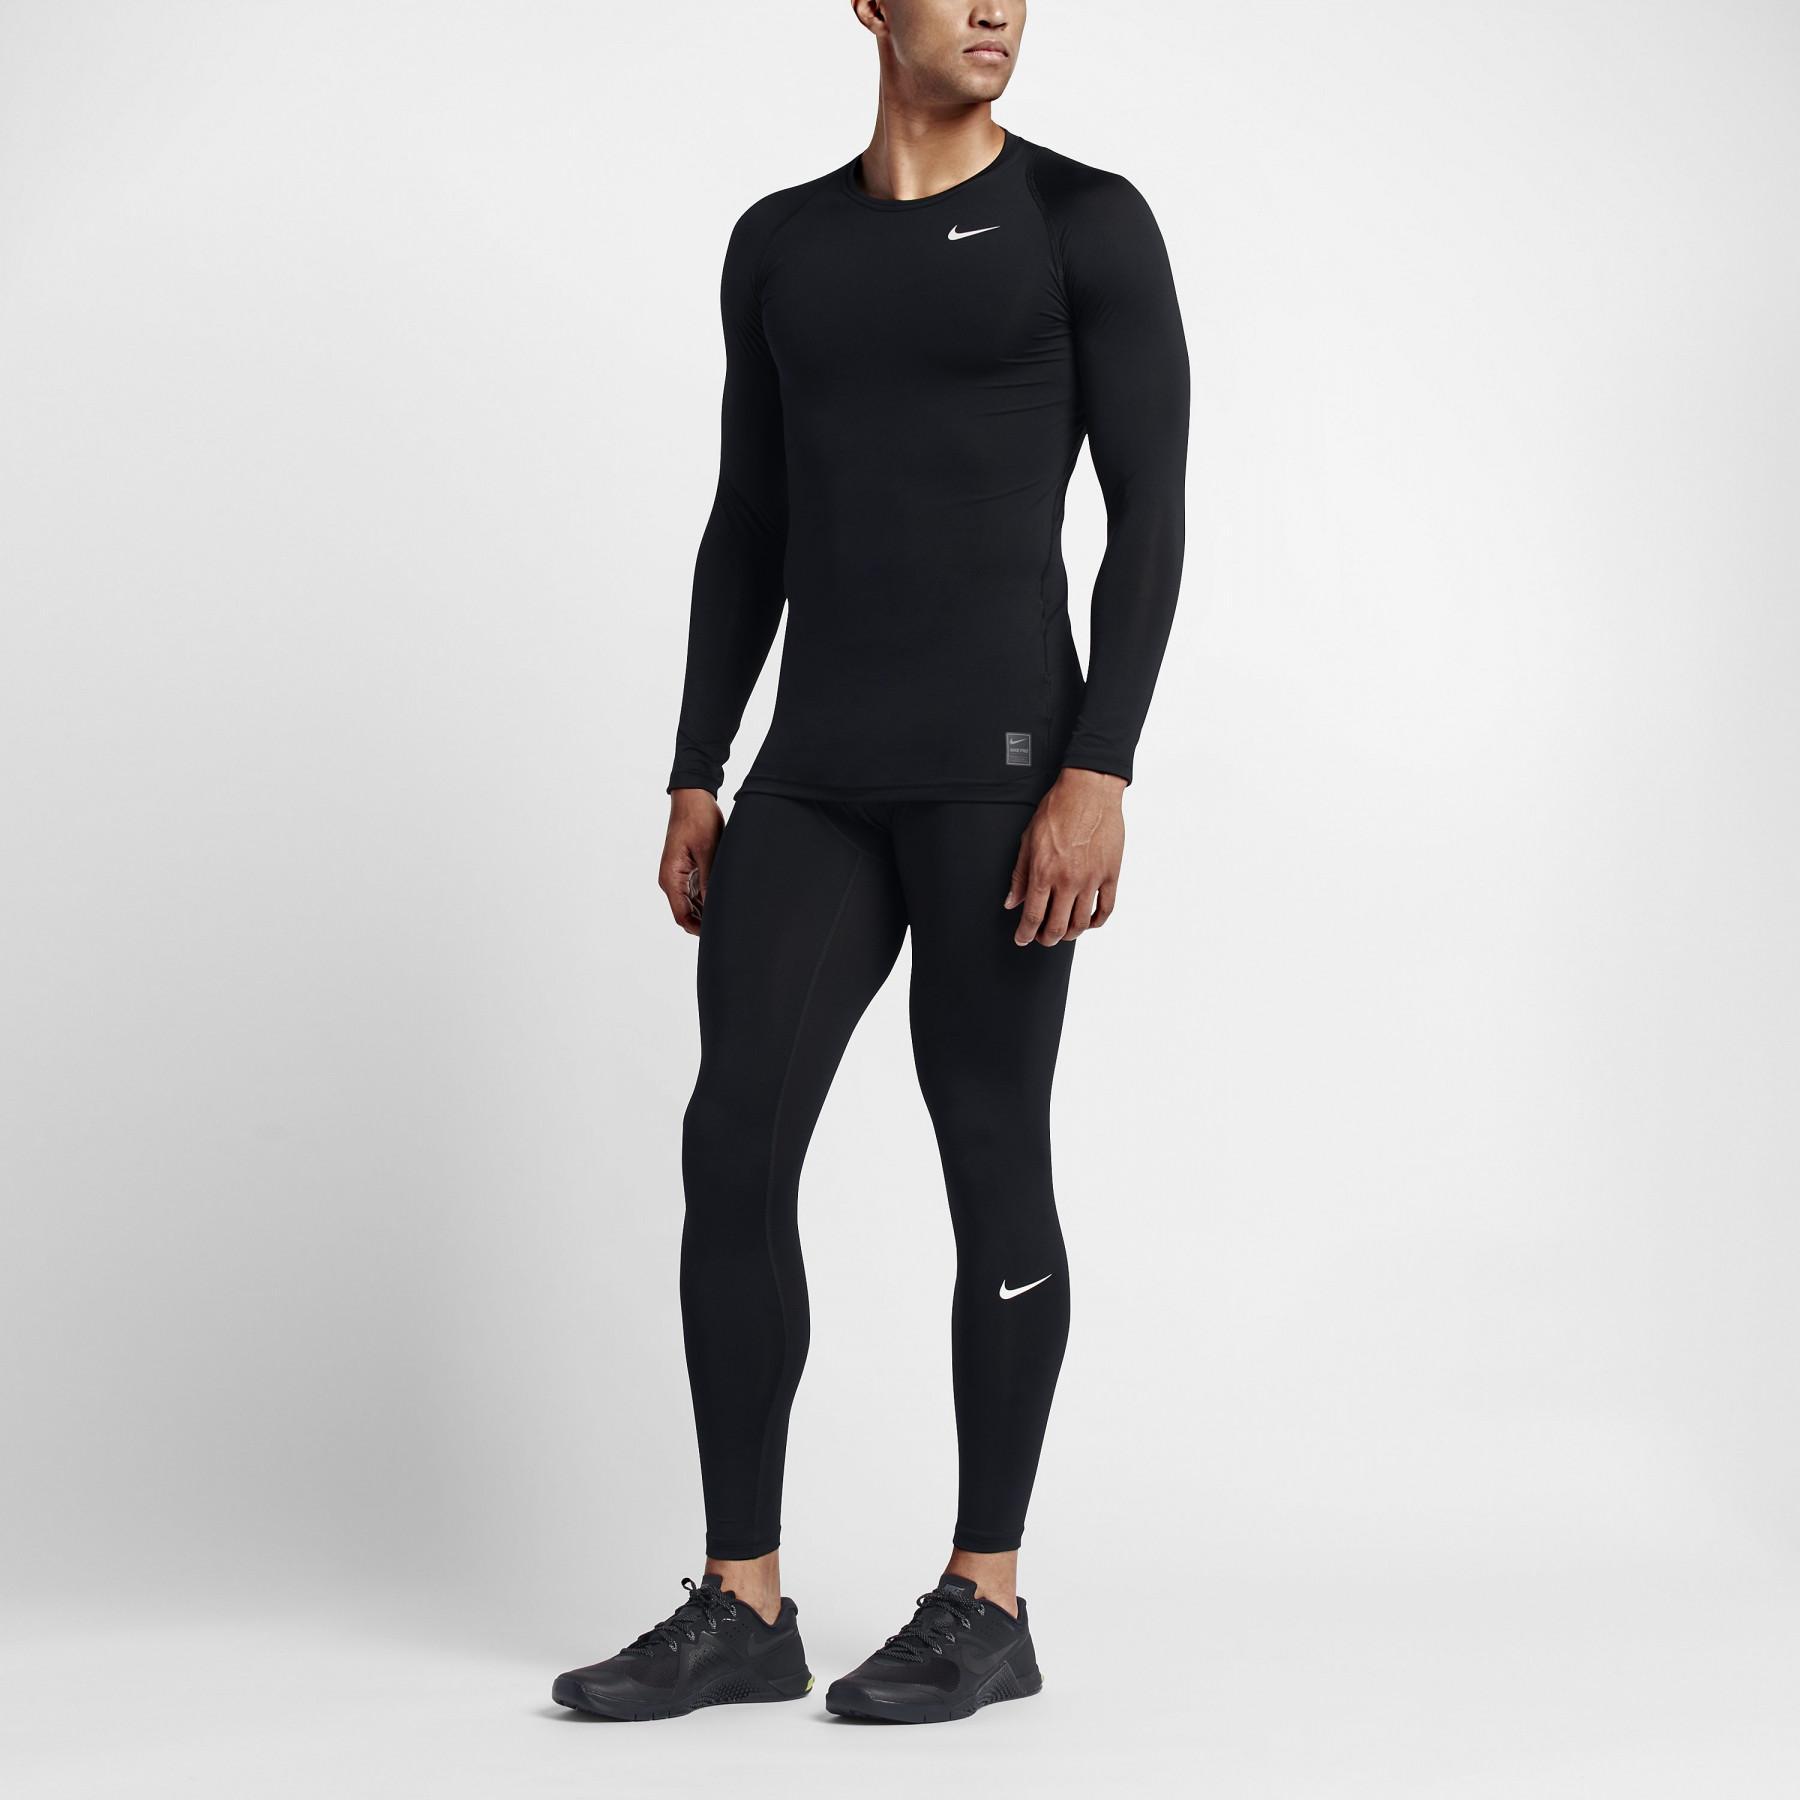 Long sleeve compression jersey Nike Pro